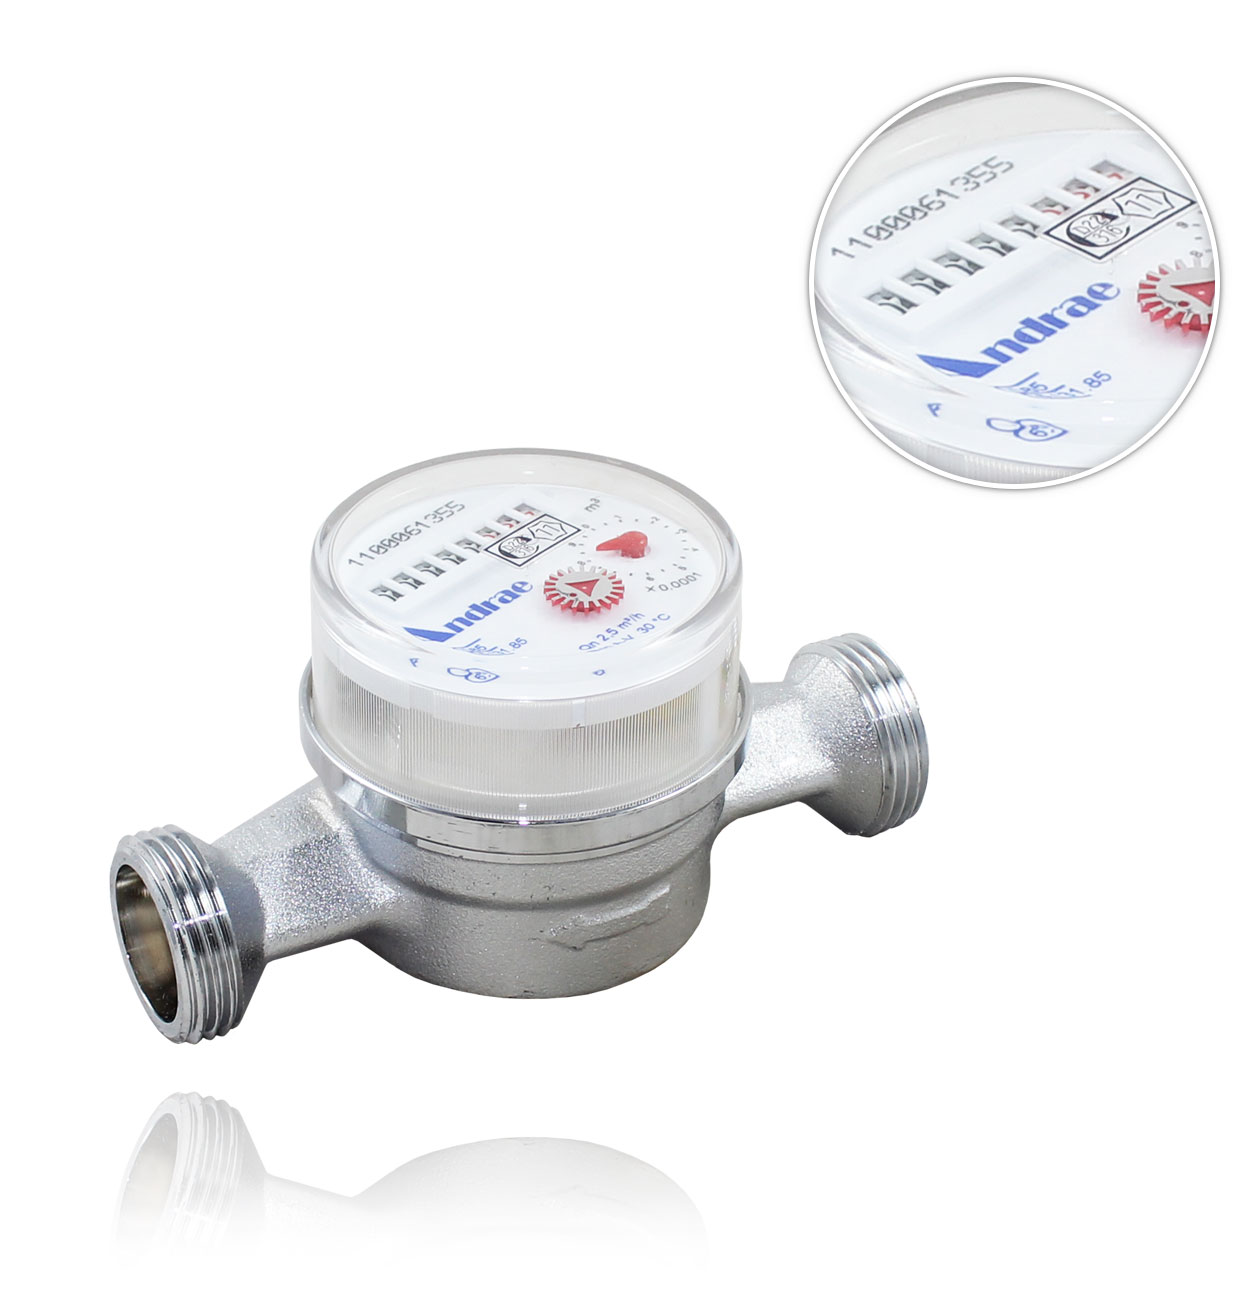 1" MM ABB COLD WATER METER